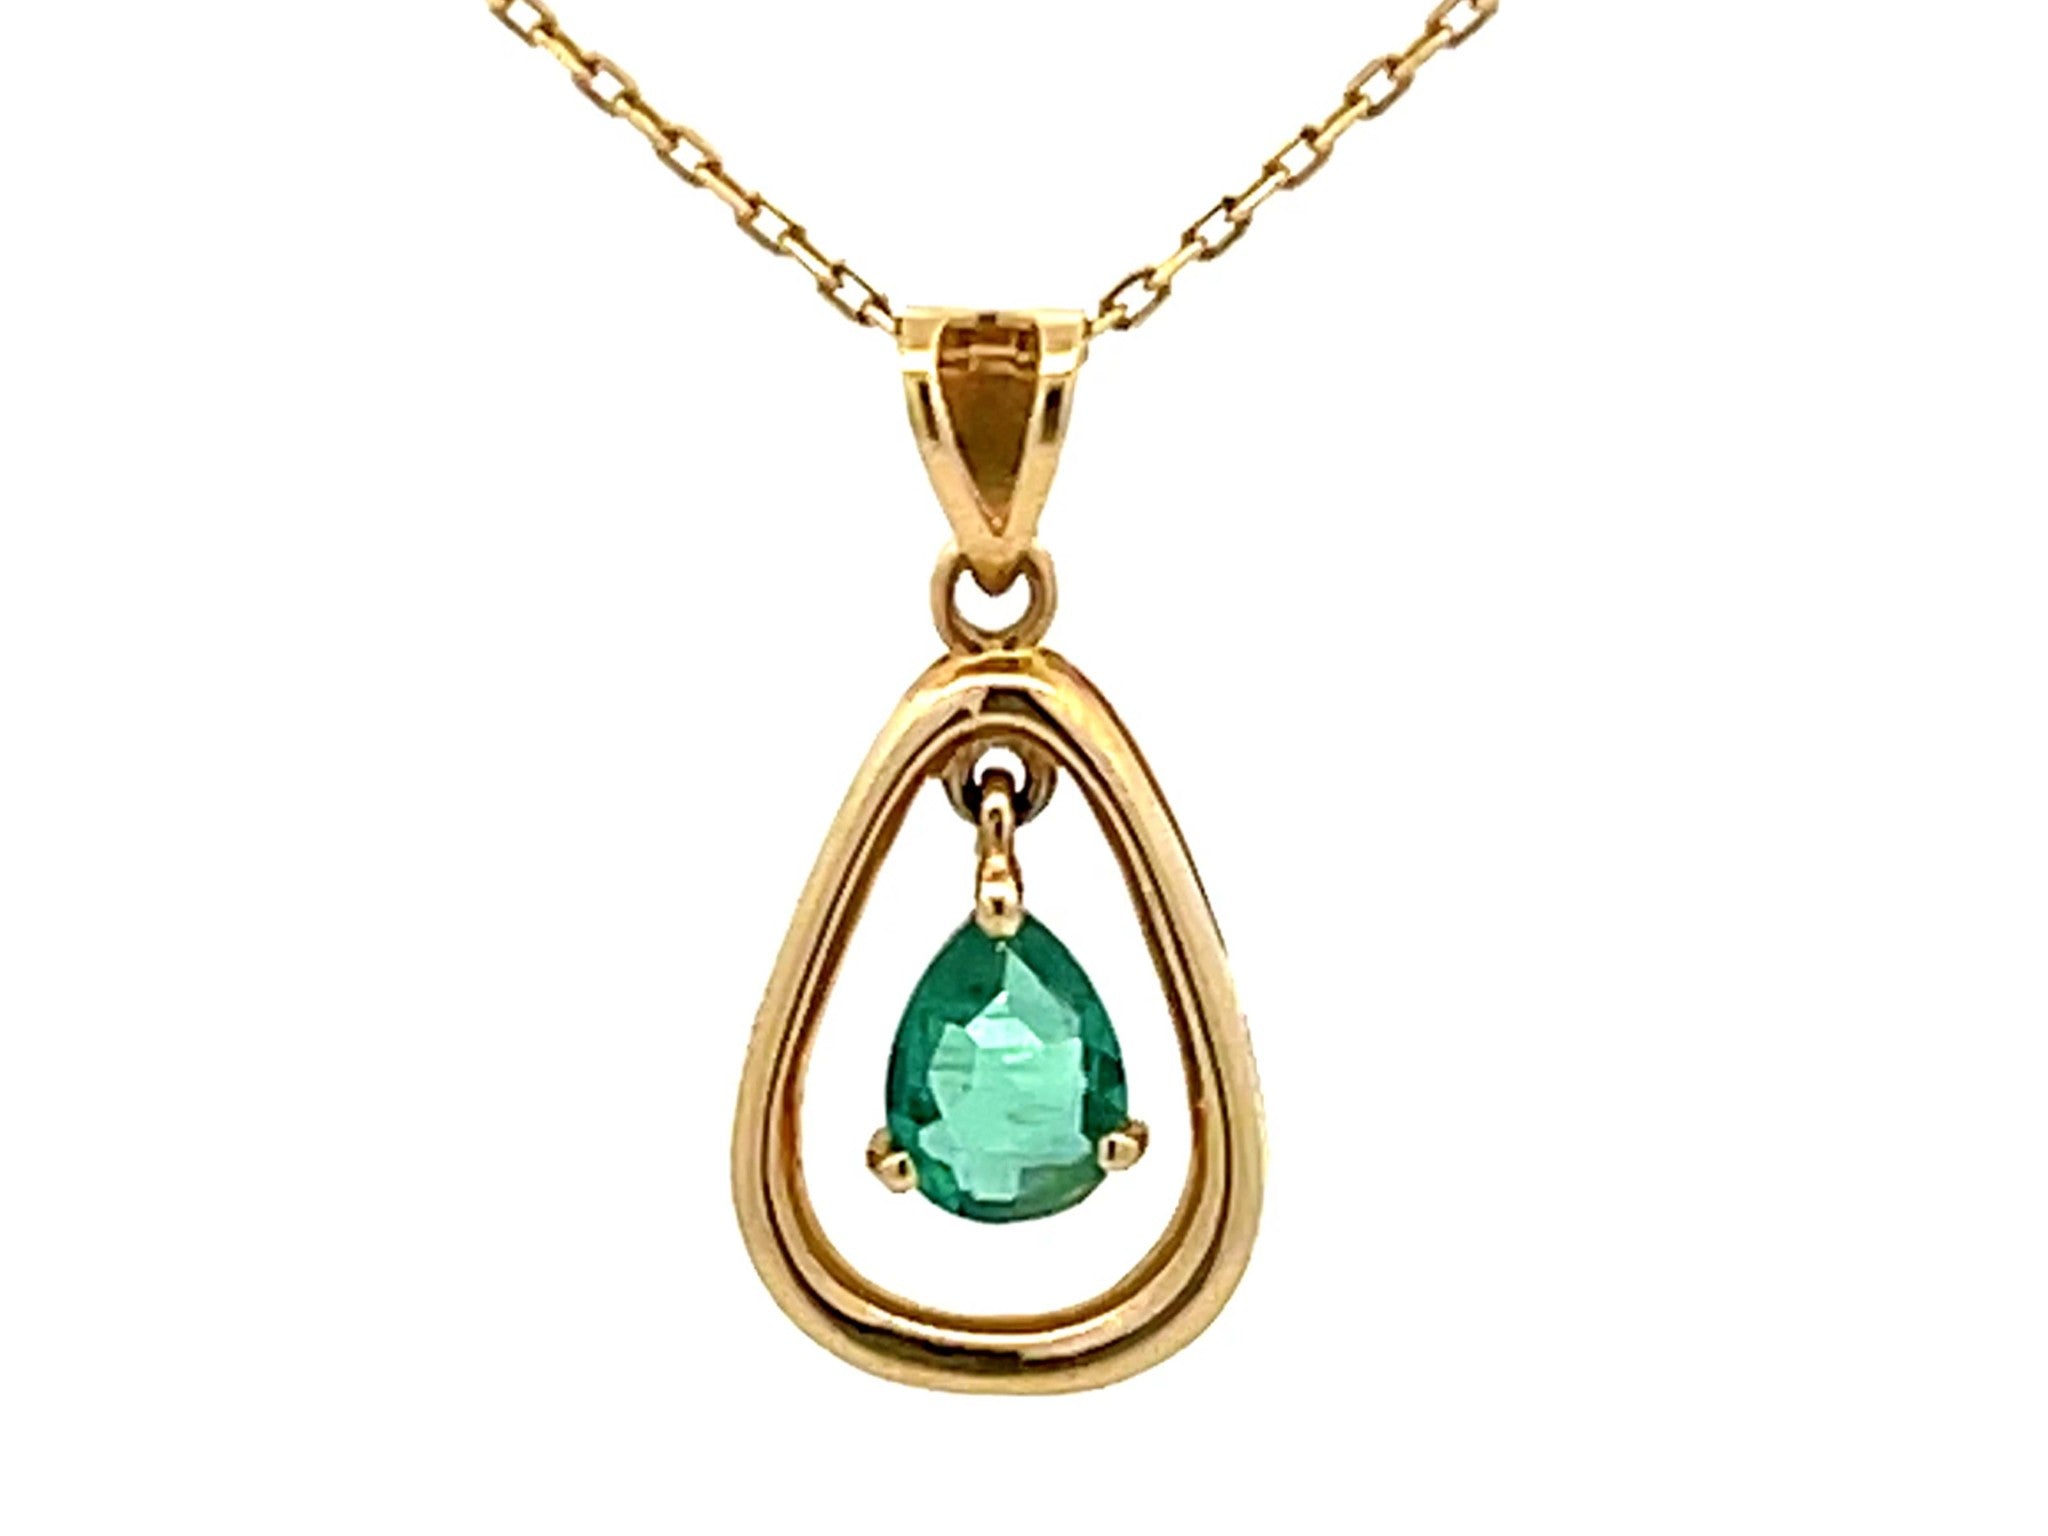 Dangly Pear Shaped Emerald Necklace 14K Yellow Gold